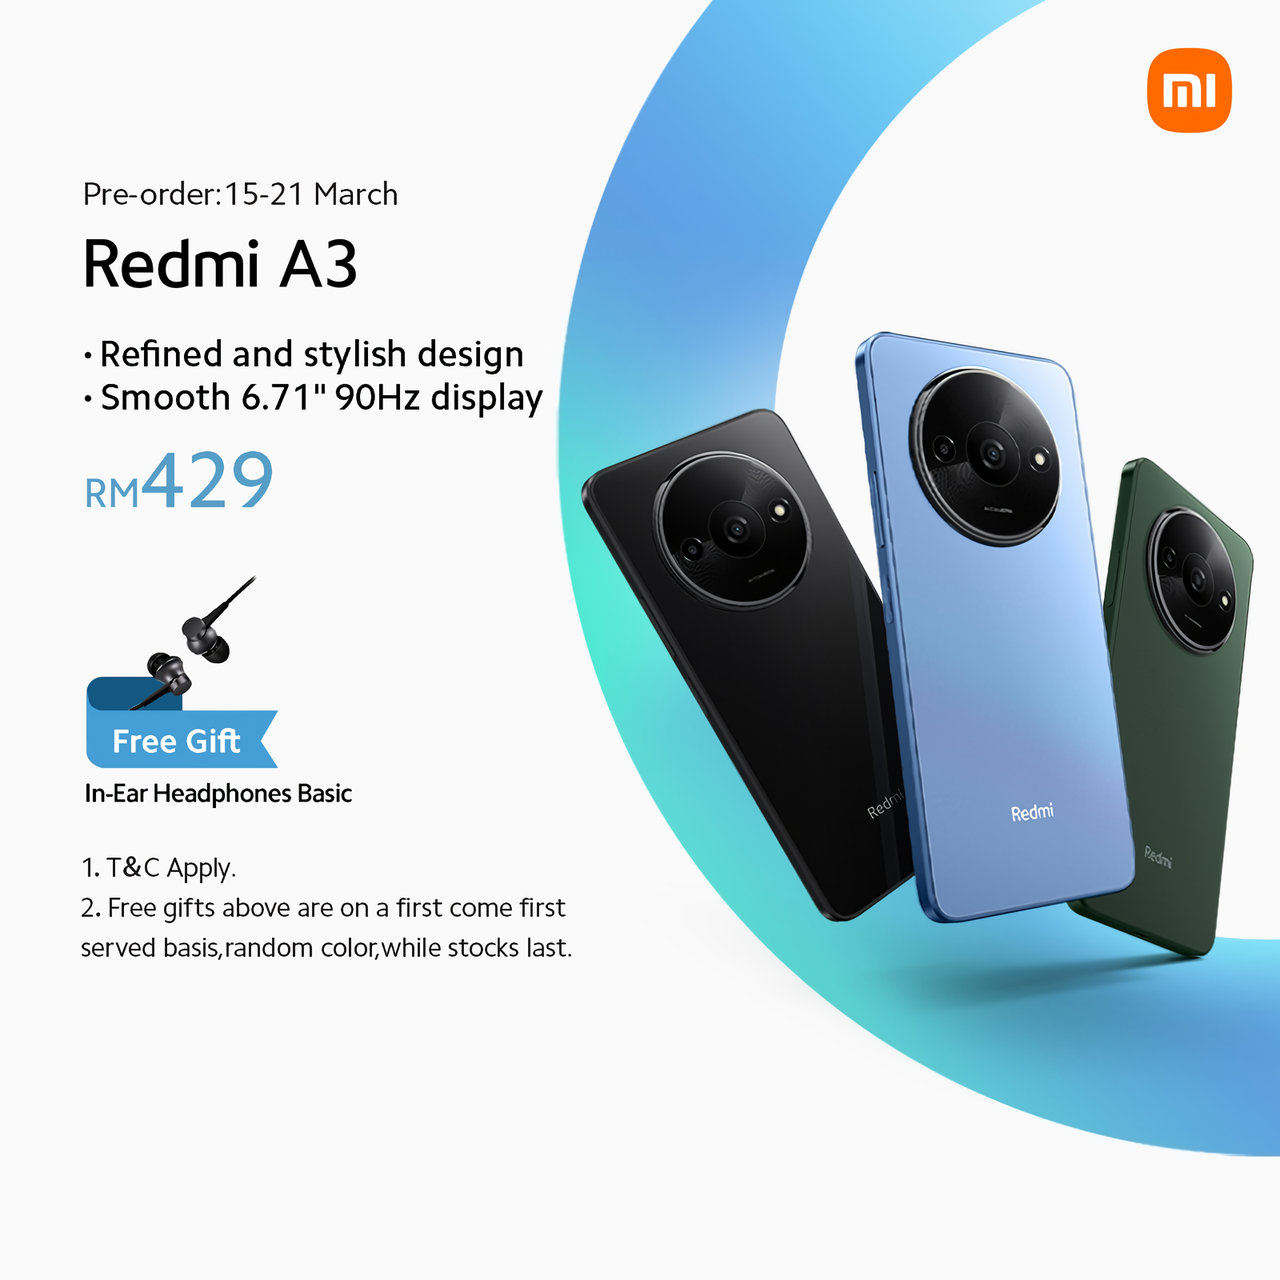 Redmi A3: Large 6.71″ high refresh rate display and dual cameras for less than RM500